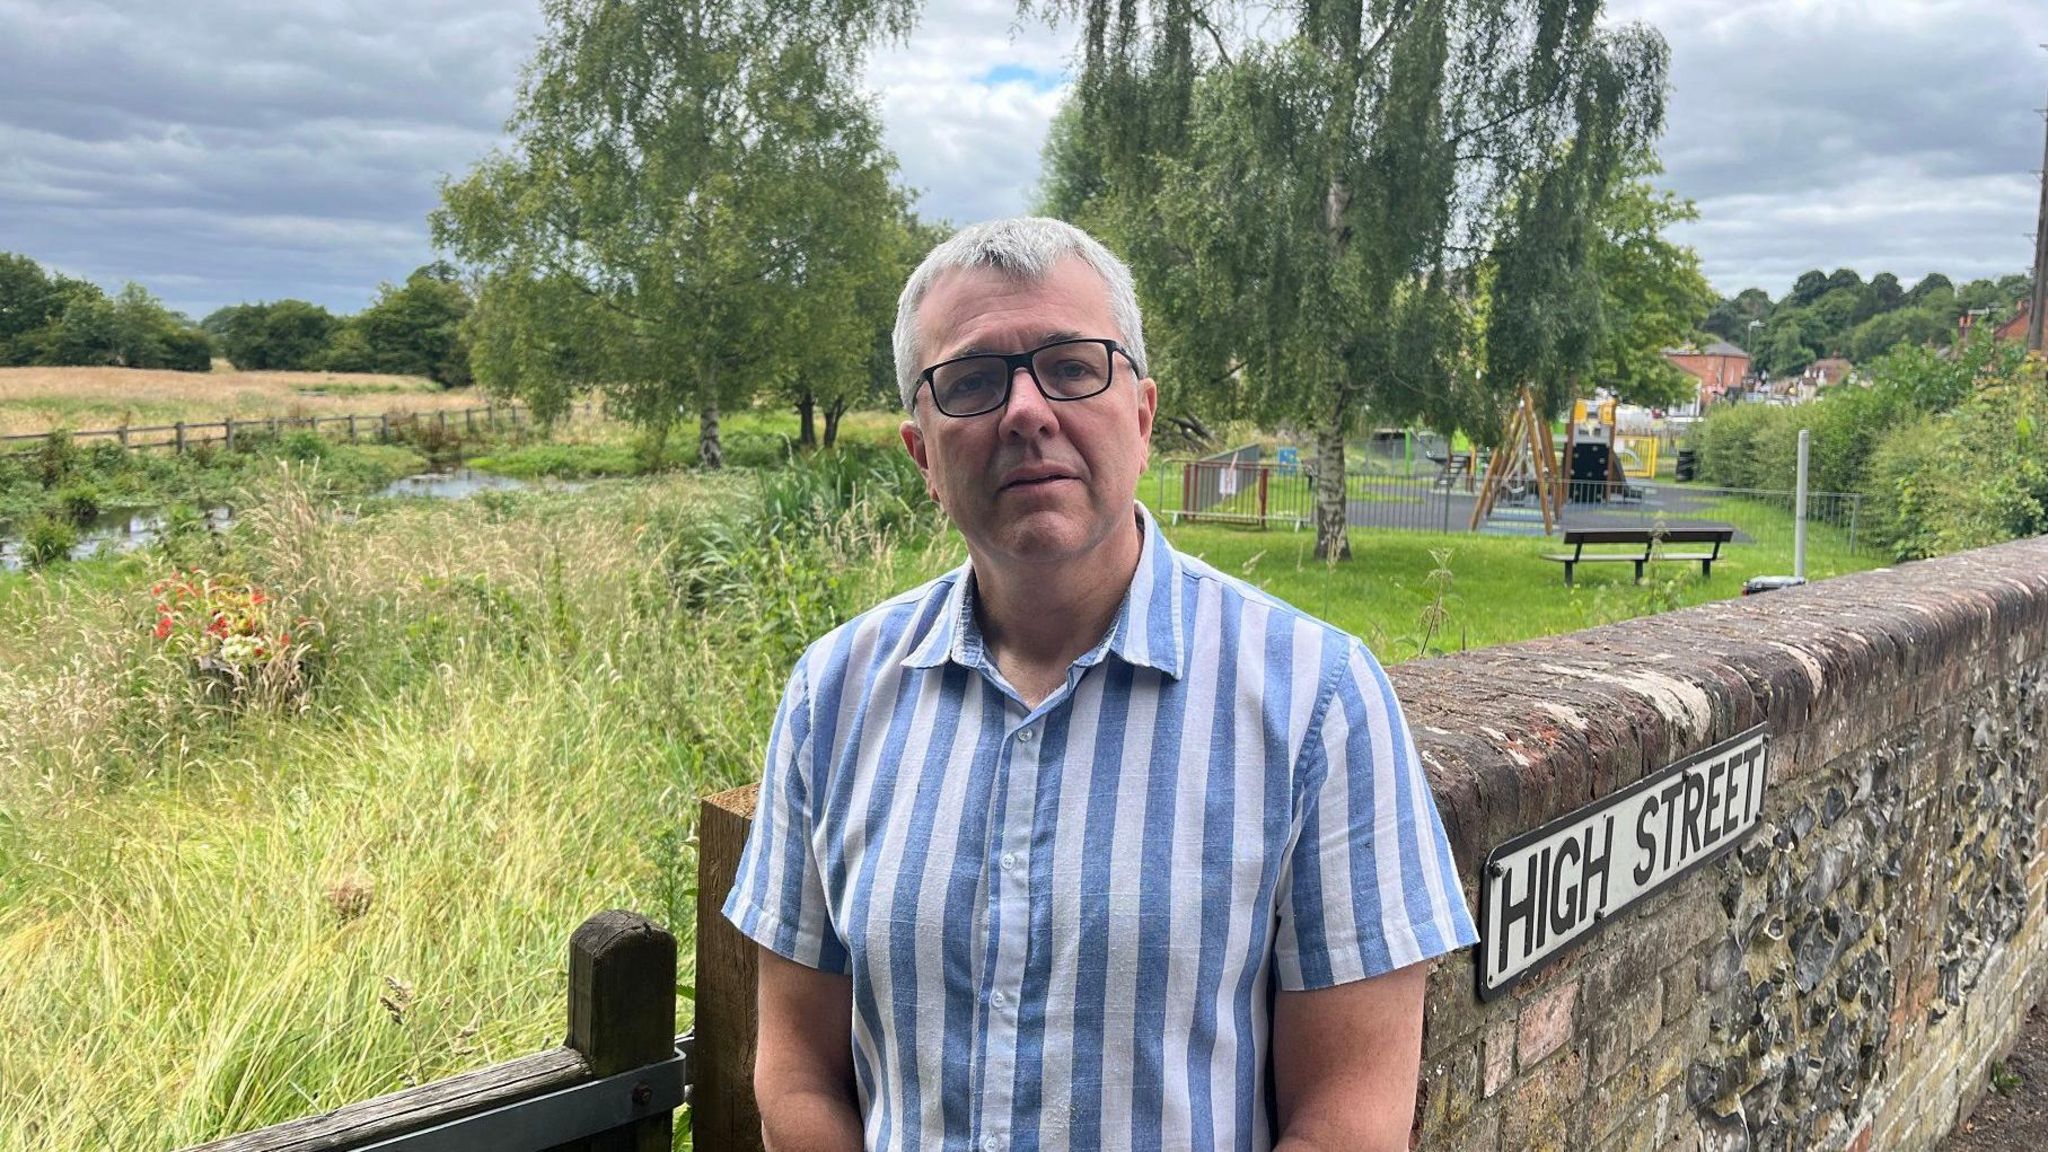 Robert Gill, in a stripy short-sleeved shirt, looking concerned as he stands close to the River Misbourne